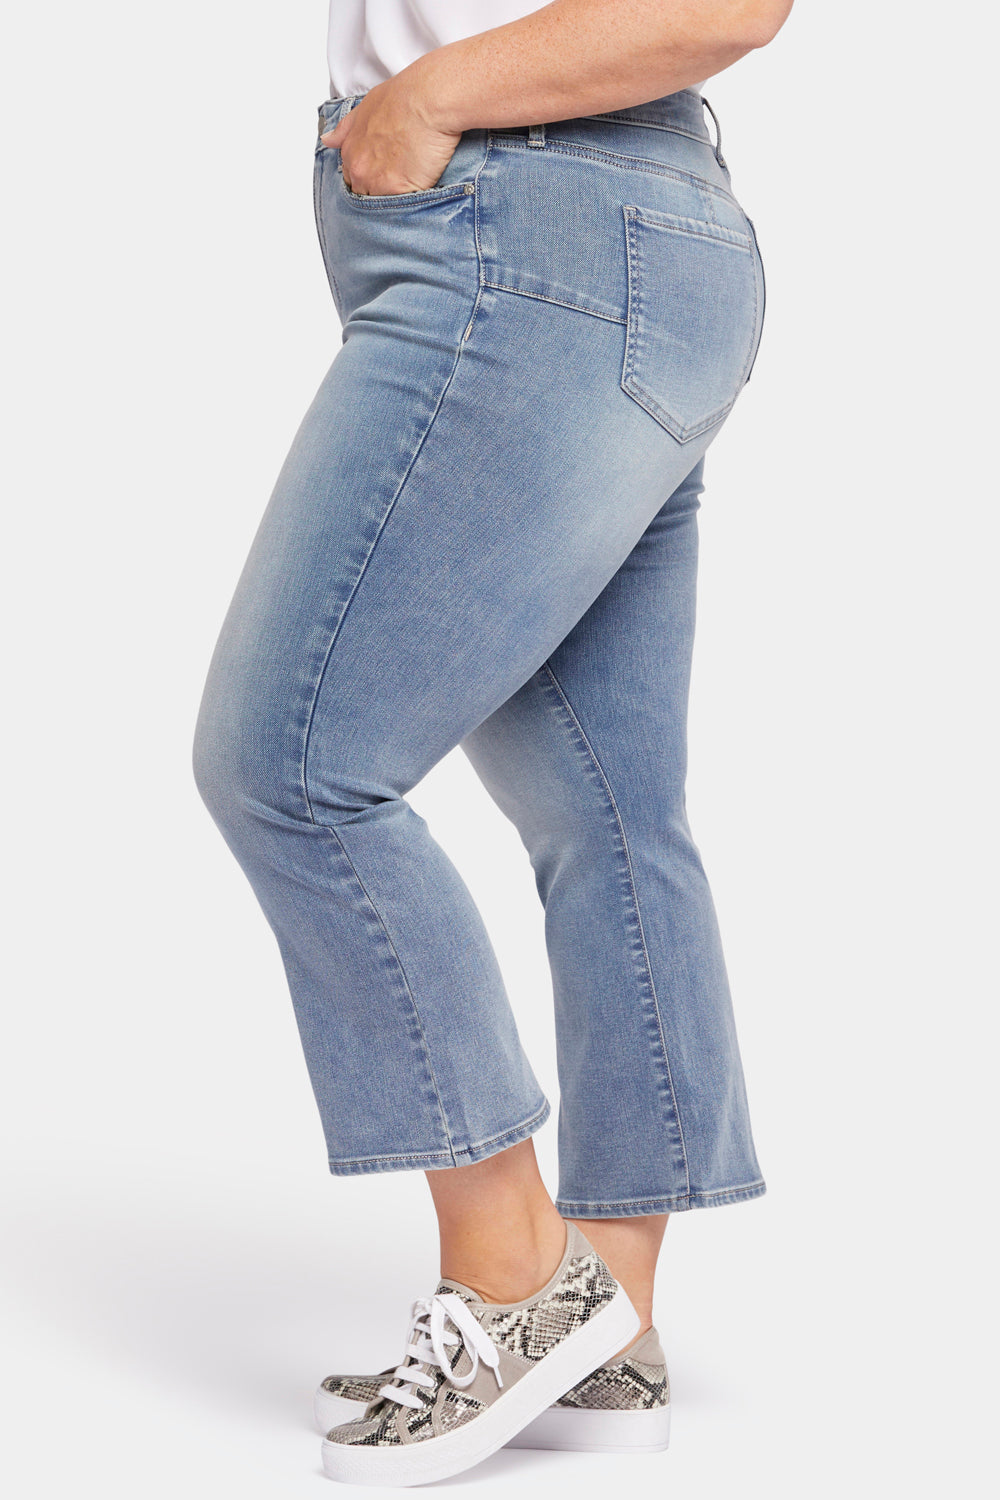 NYDJ Uplift Fiona Slim Flared Ankle Jeans In Plus Size In Future Fit Denim® - Spellbound